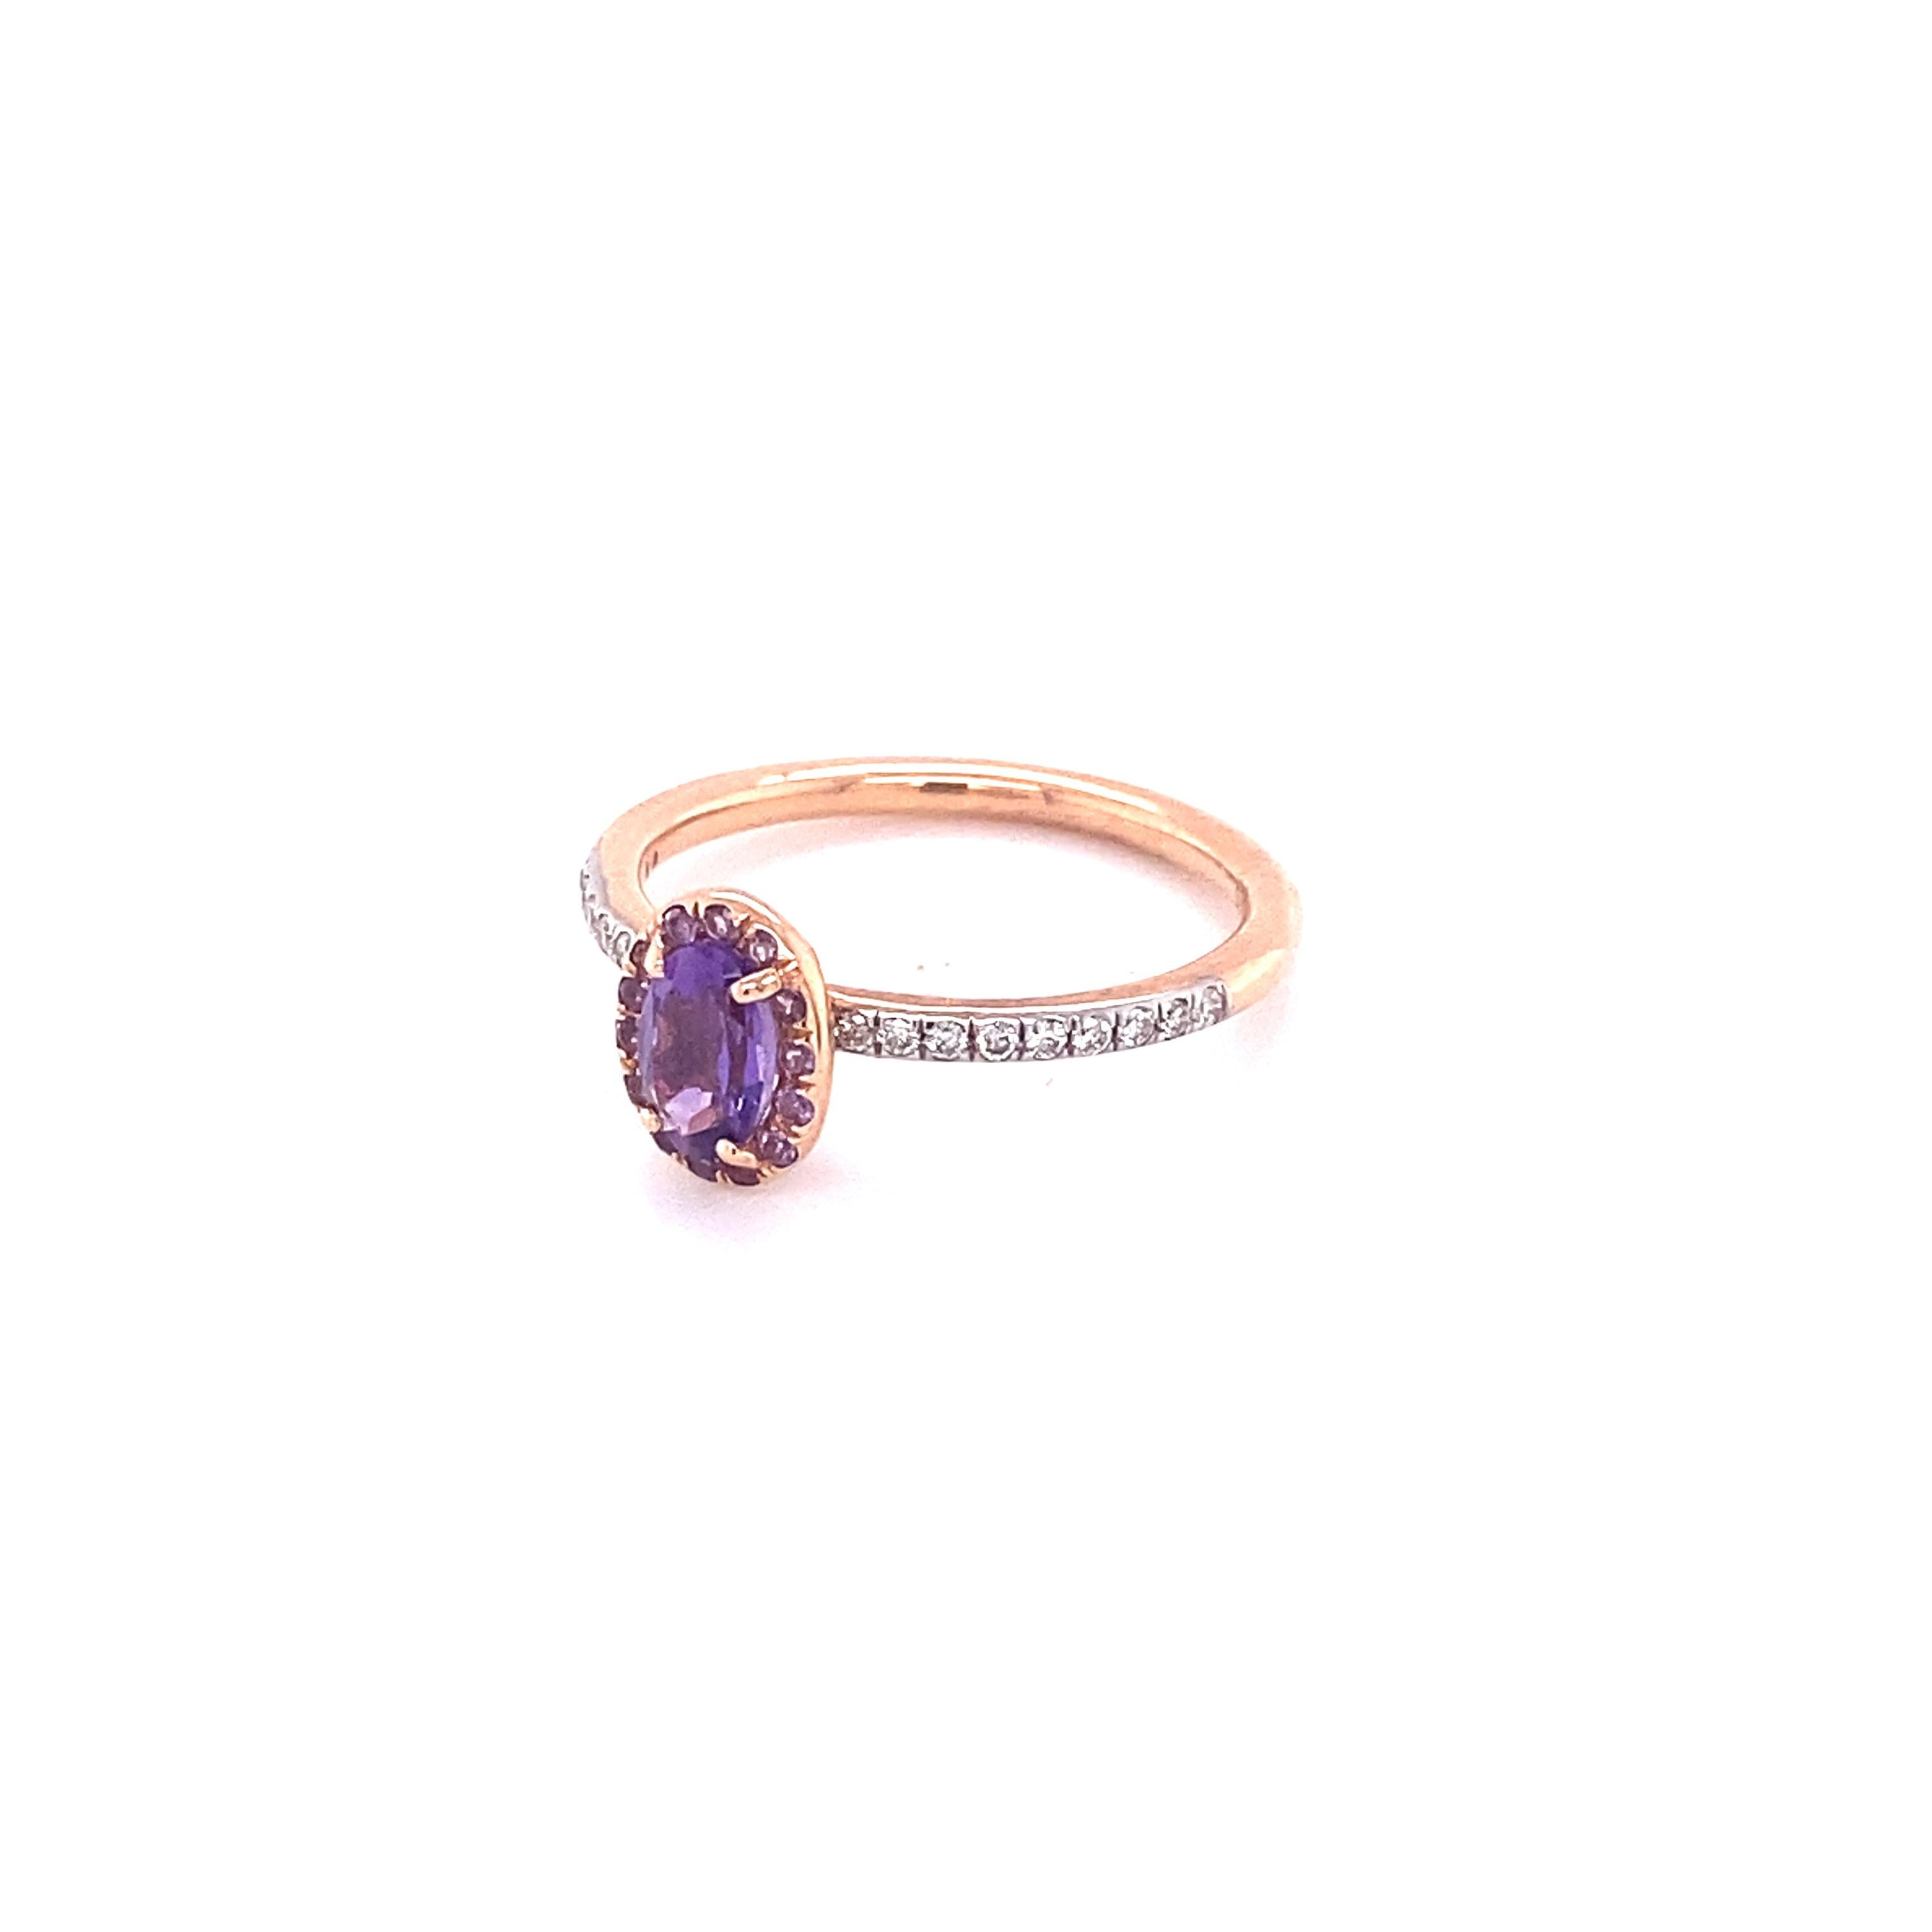 Amethyst Ring with a beautiful purple center stone! That is just the beginning though! The halo also has Amethyst stones, and they do not hide the purple Amethyst center stone still! This ring also has white diamonds on the shank! This ring is